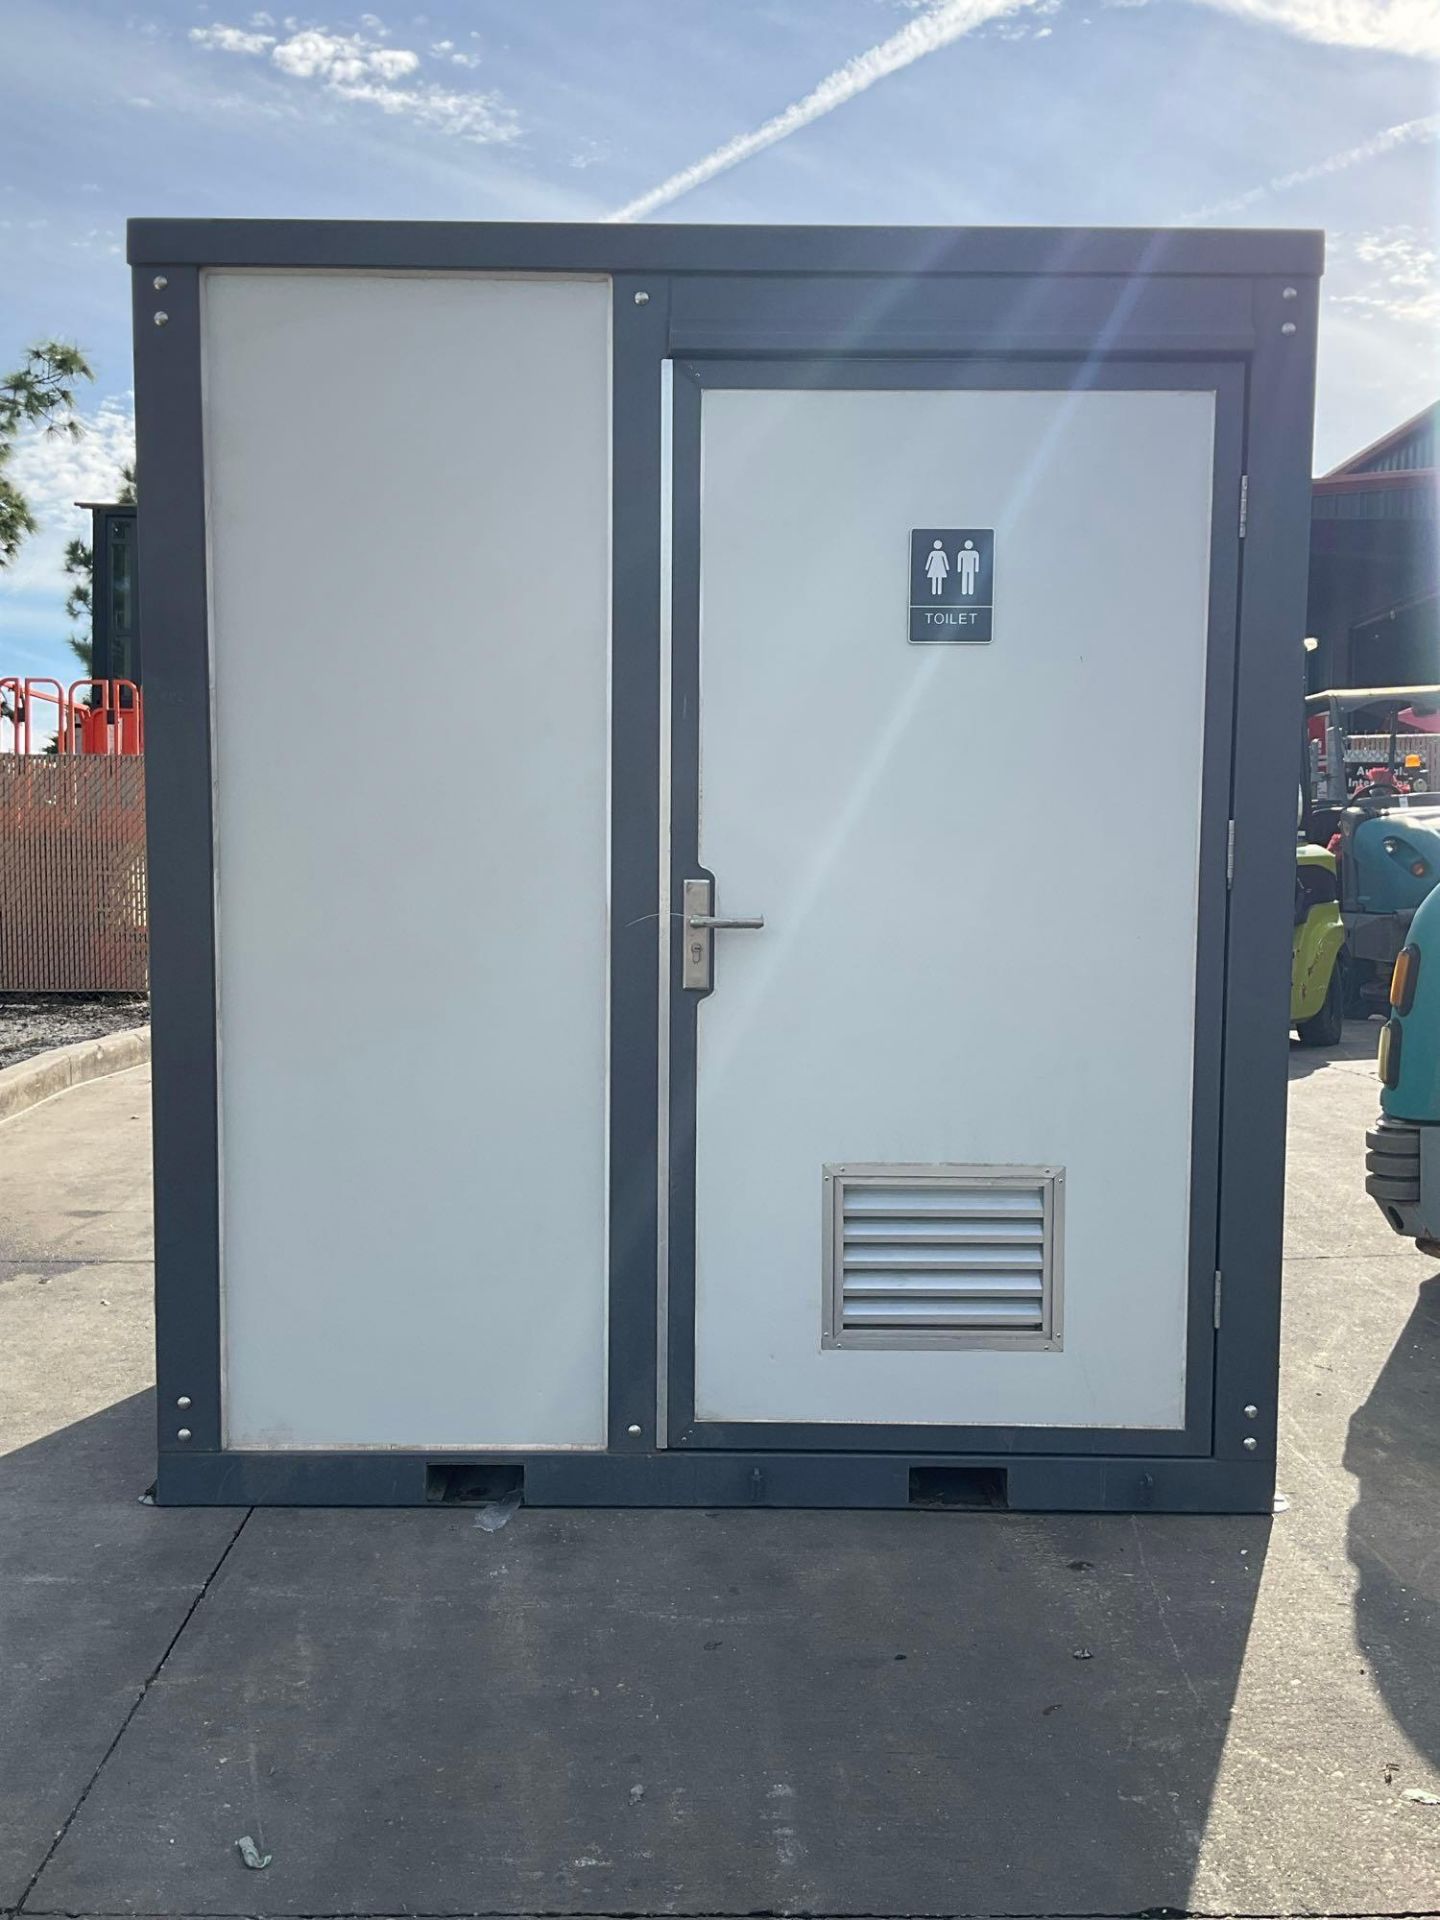 UNUSED PORTABLE HANDICAP BATHROOM UNIT WITH HANDICAP ACCESSIBLE, ELECTRIC & PLUMBING HOOK UP WITH... - Image 9 of 18